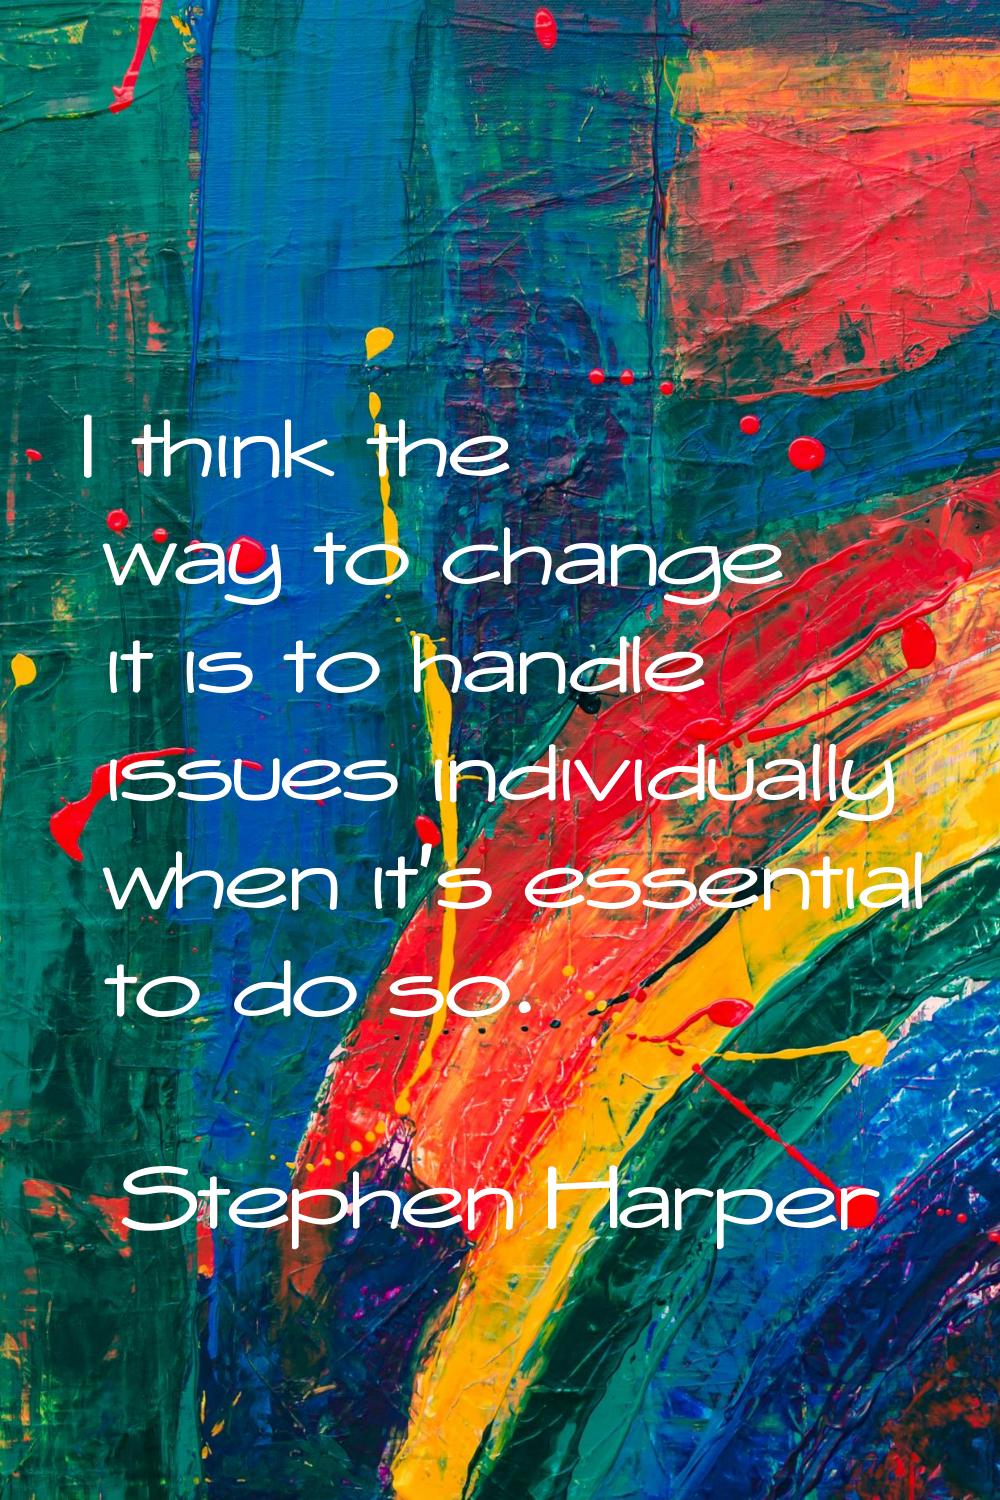 I think the way to change it is to handle issues individually when it's essential to do so.